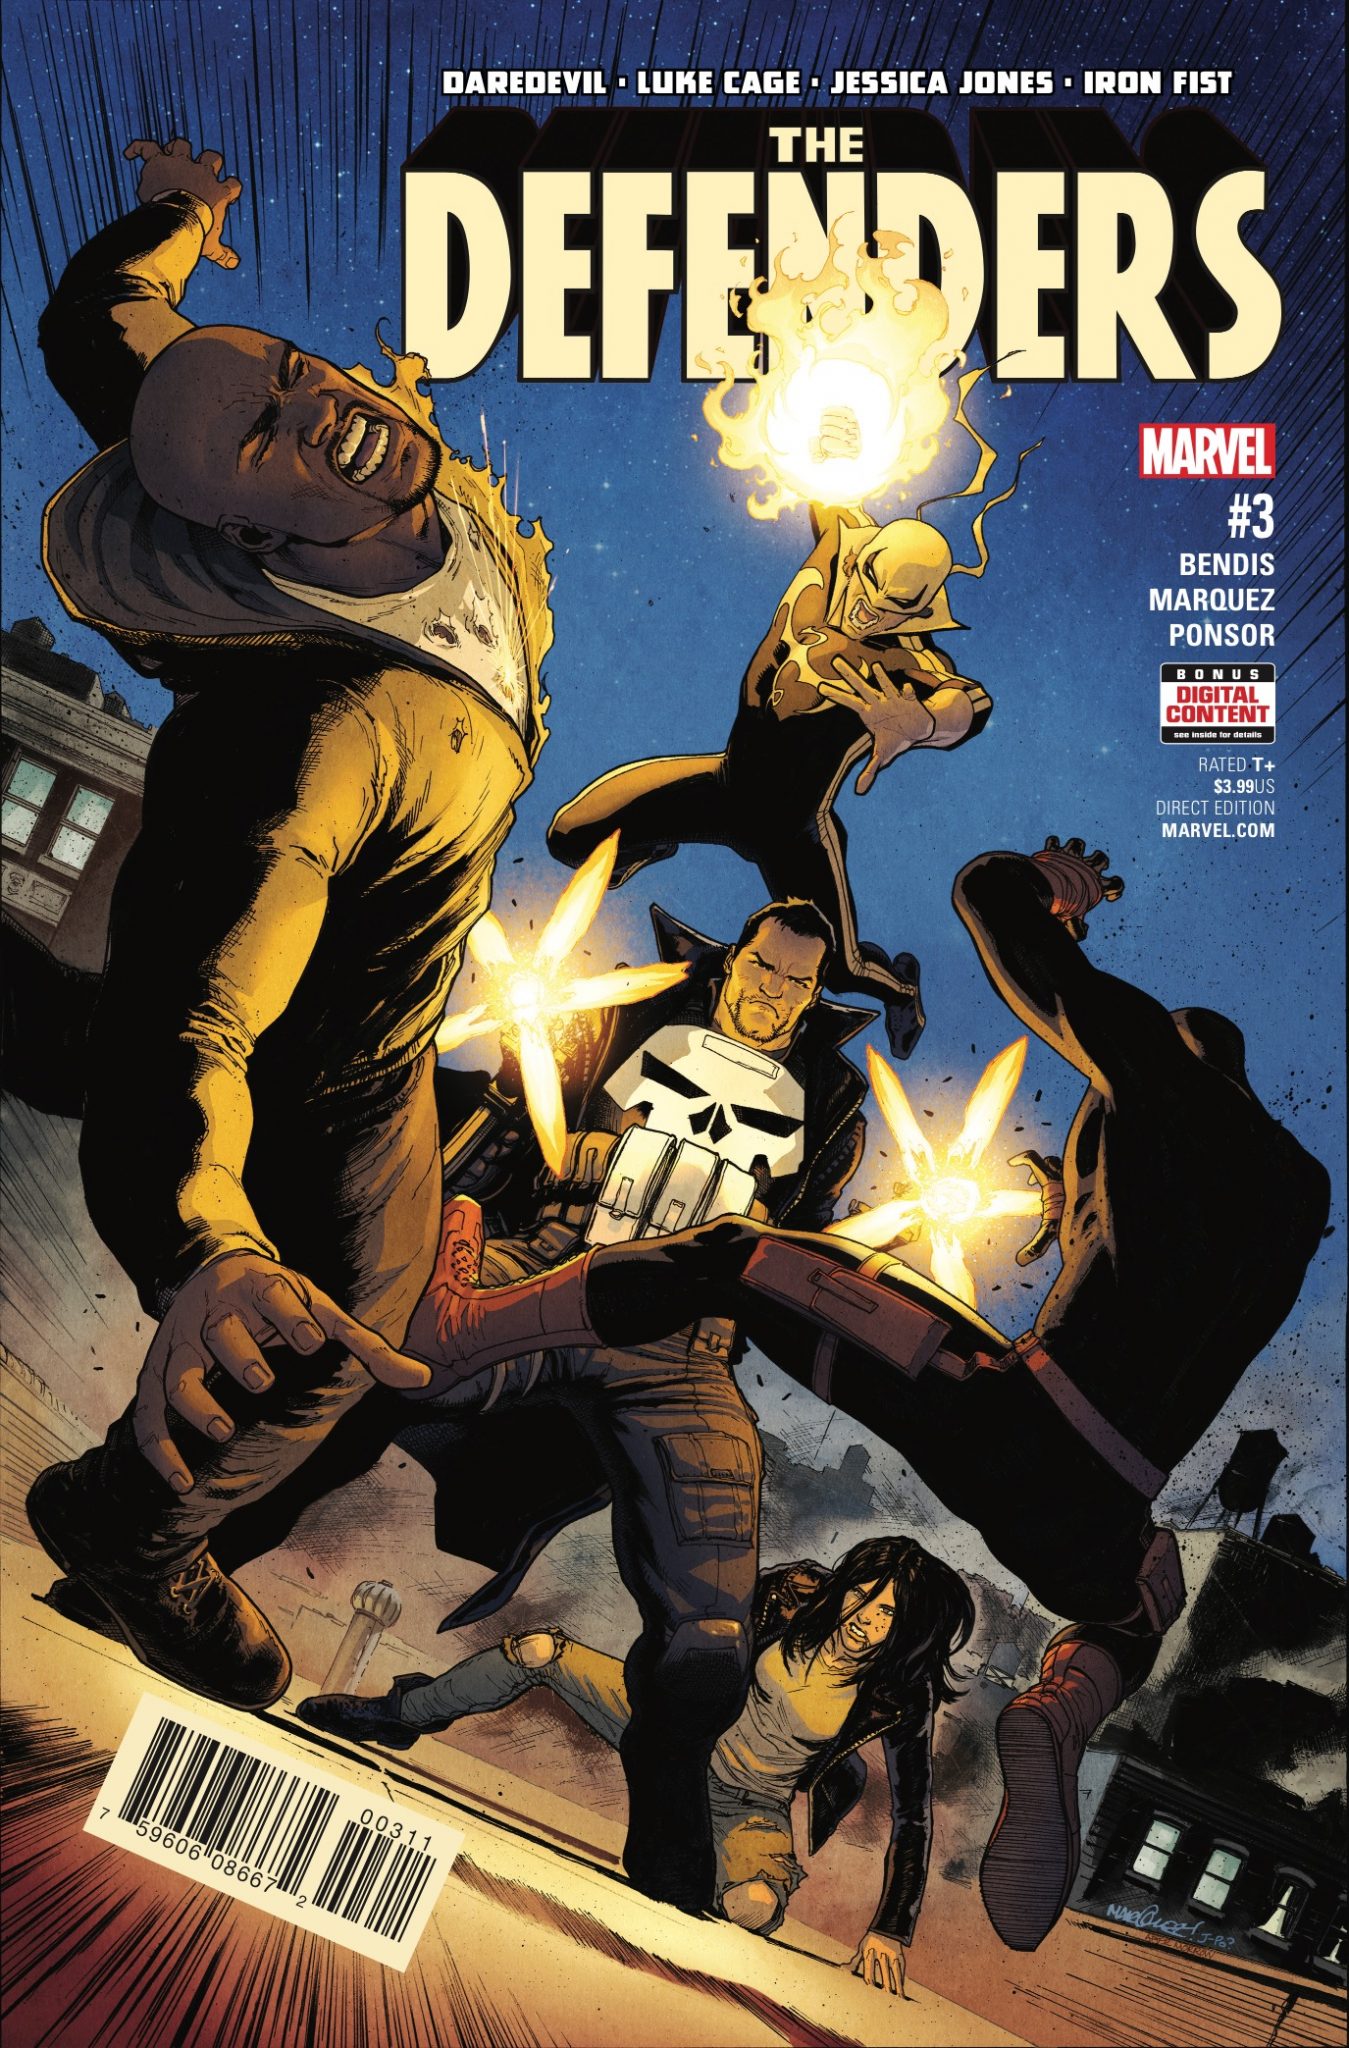 The Defenders #3 Review